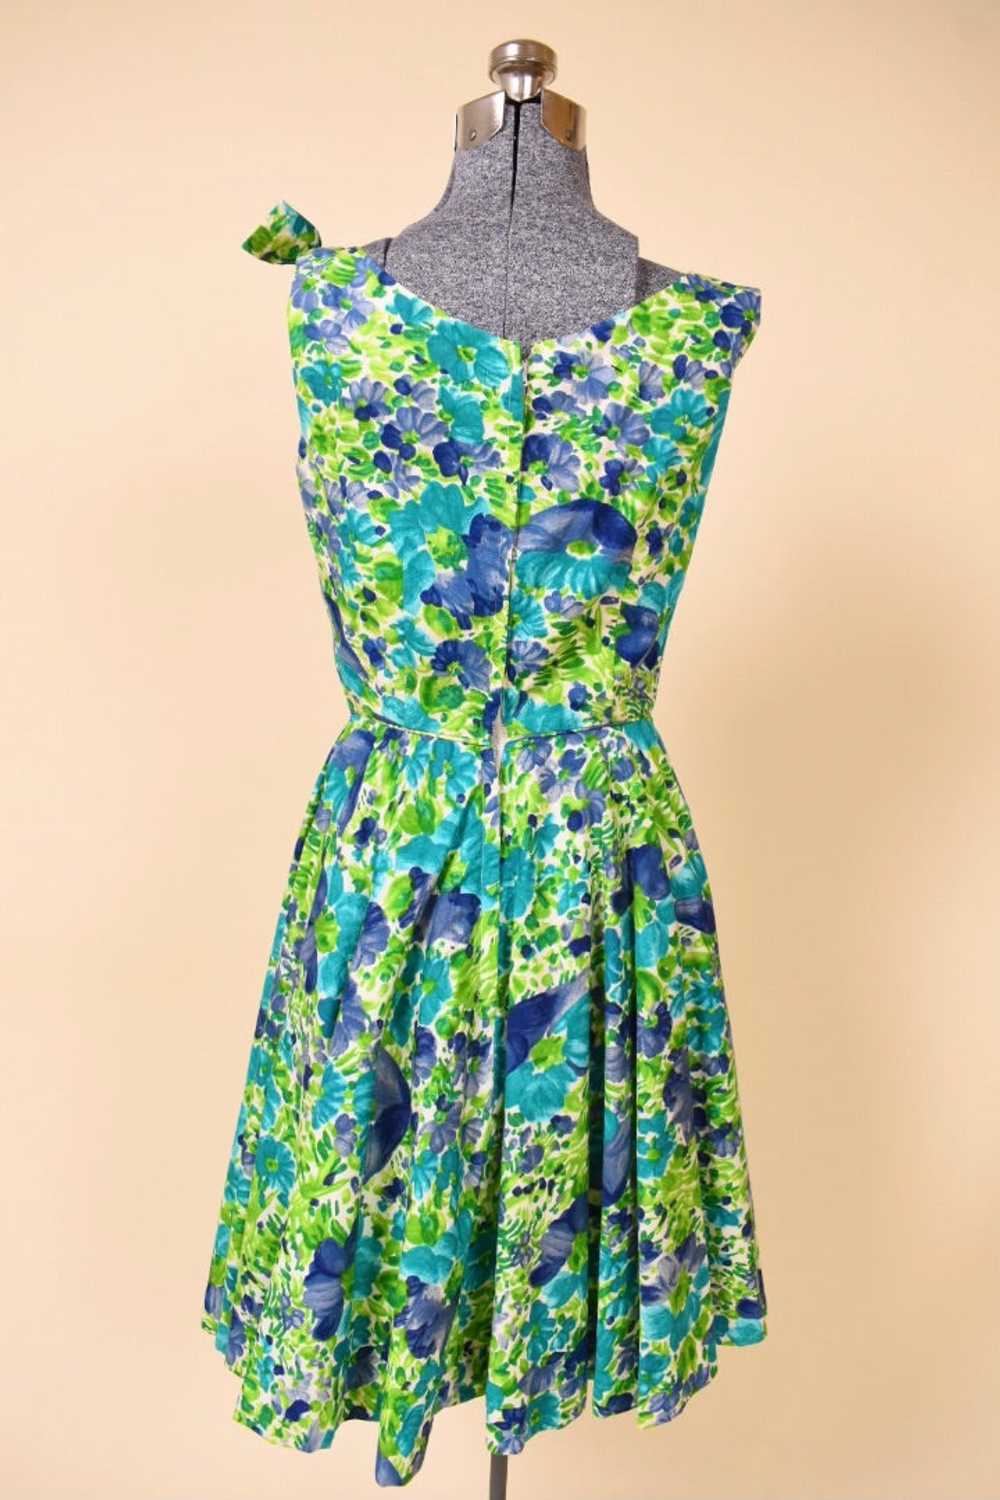 Green Floral Day Dress w/ Bow By Jay Herbert, S - image 3